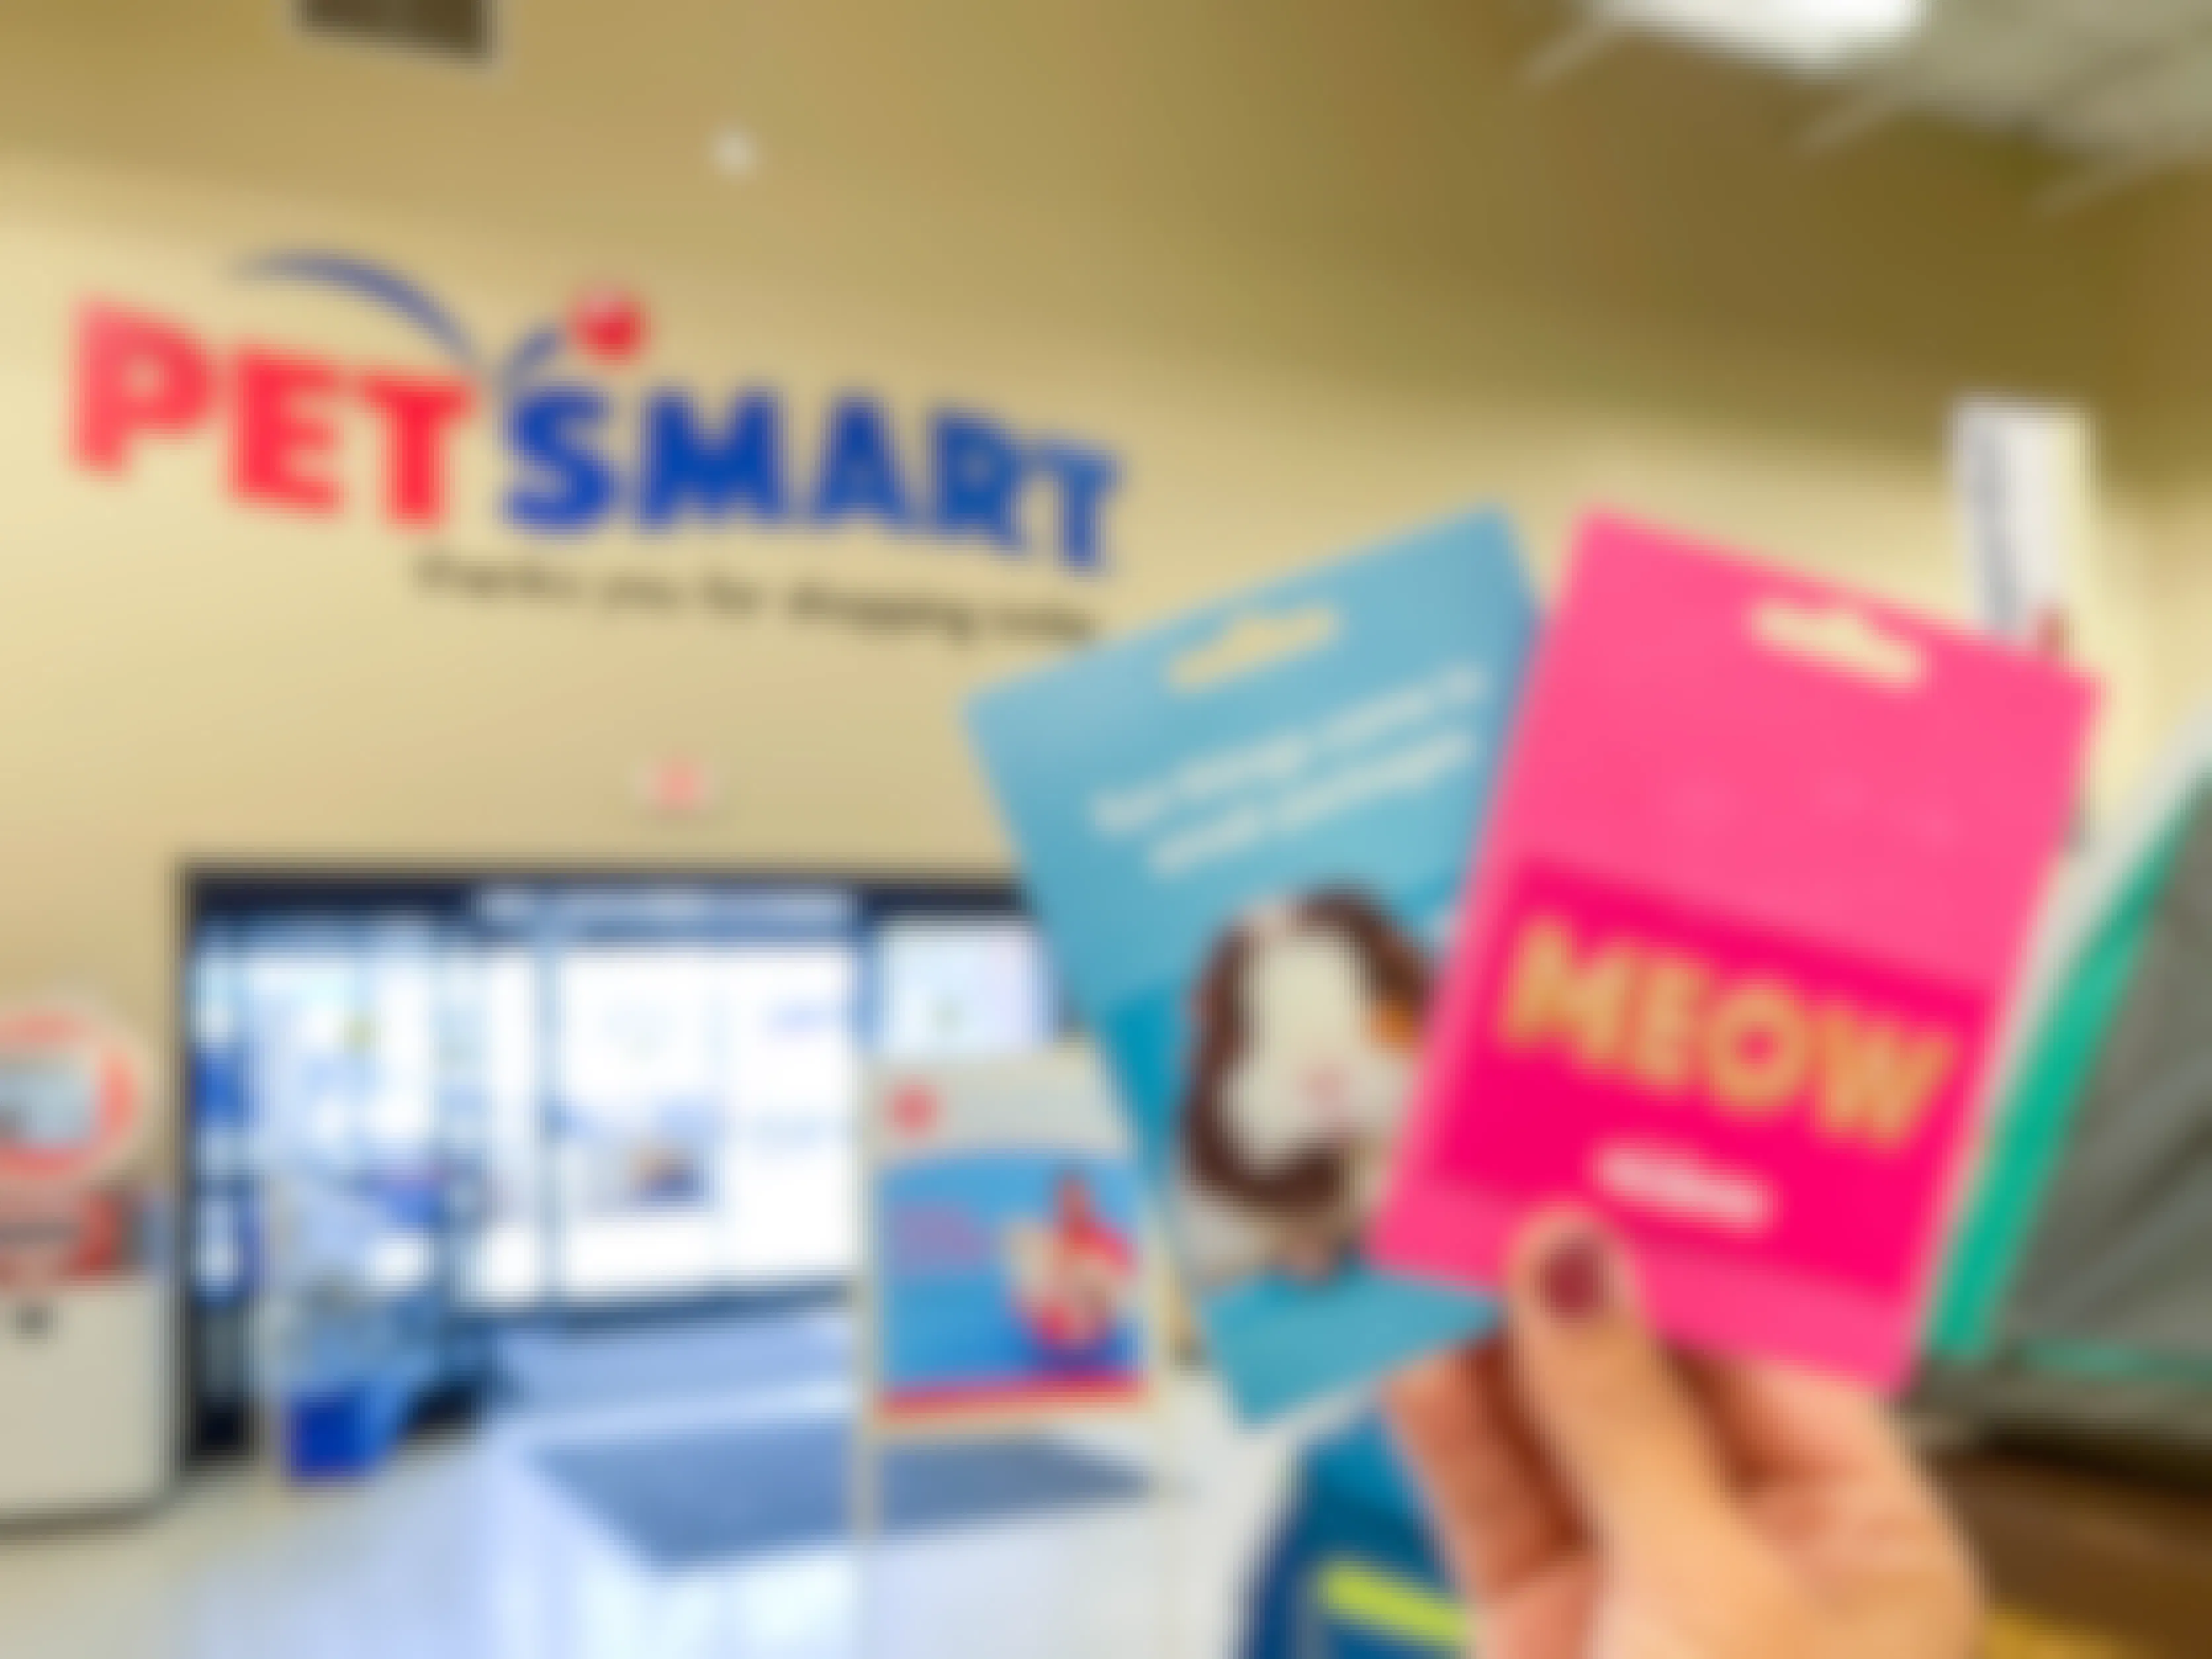 Two PetSmart gift cards being held up inside a PetSmart store, just inside the front door, with the PetSmart logo on the wall in the background.